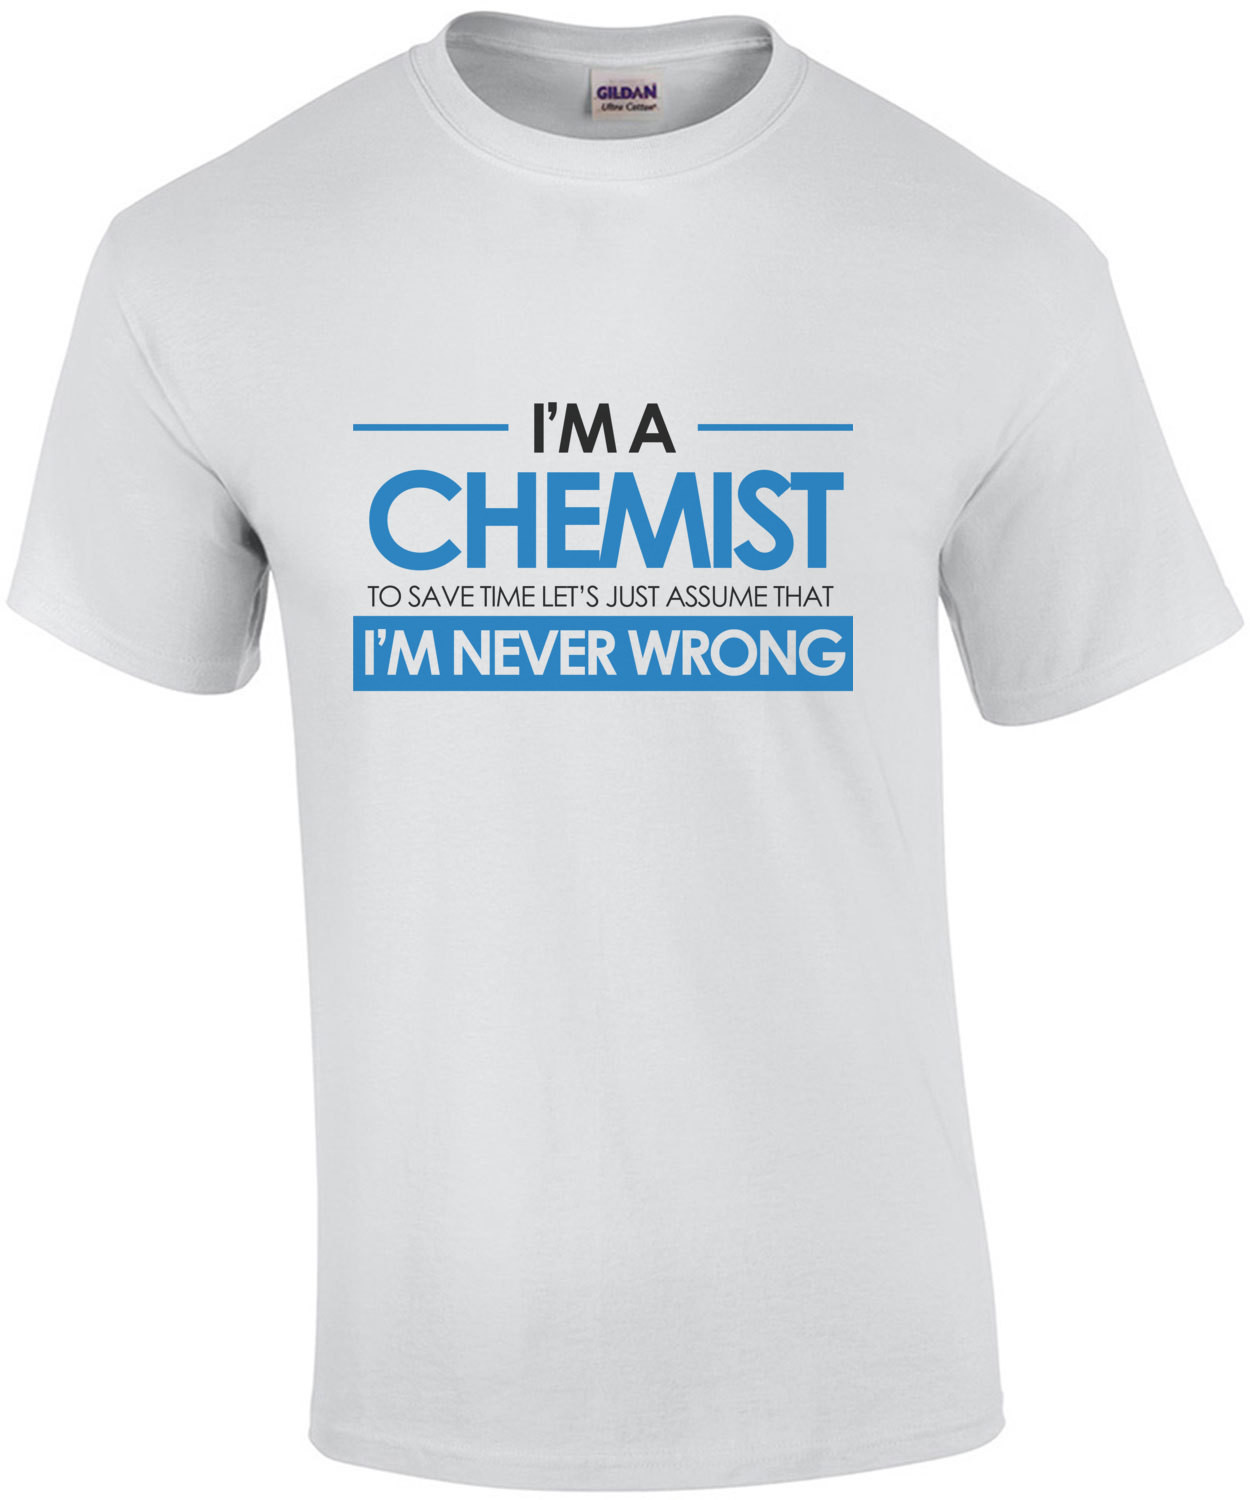 I'm a chemist to save time lets just assume that I'm never wrong - funny chemist t-shirt